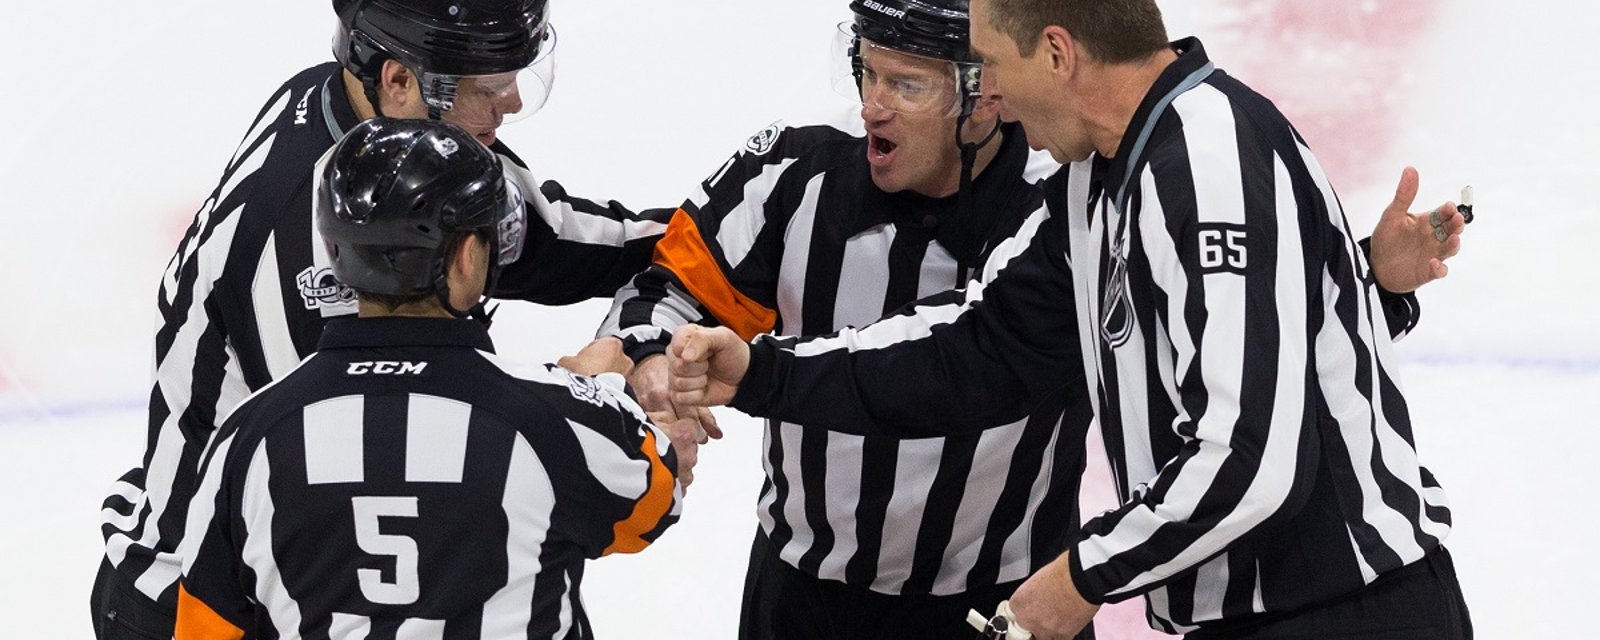 NHL officials make a terrible call and rob Pettersson of the rookie record!